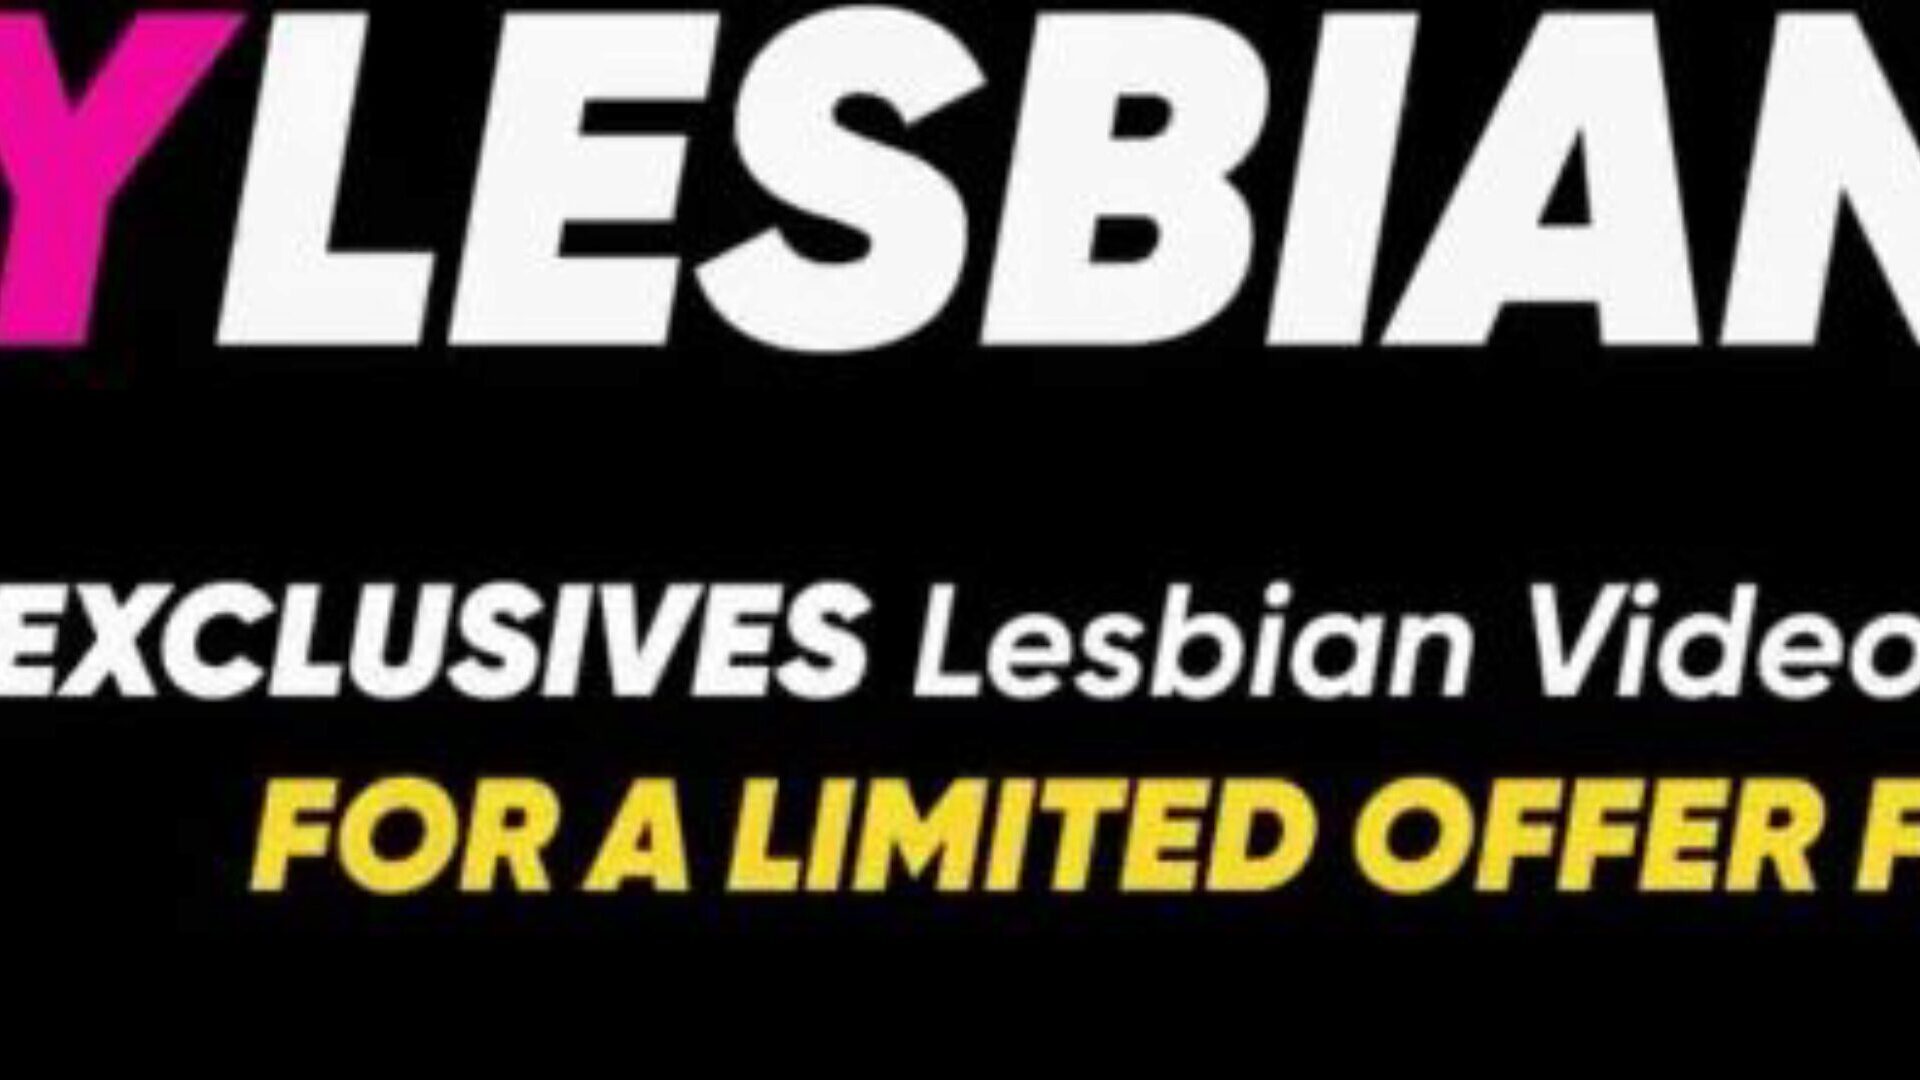 White Lesbian Fucked Hard and Passionate by Black Lesbian